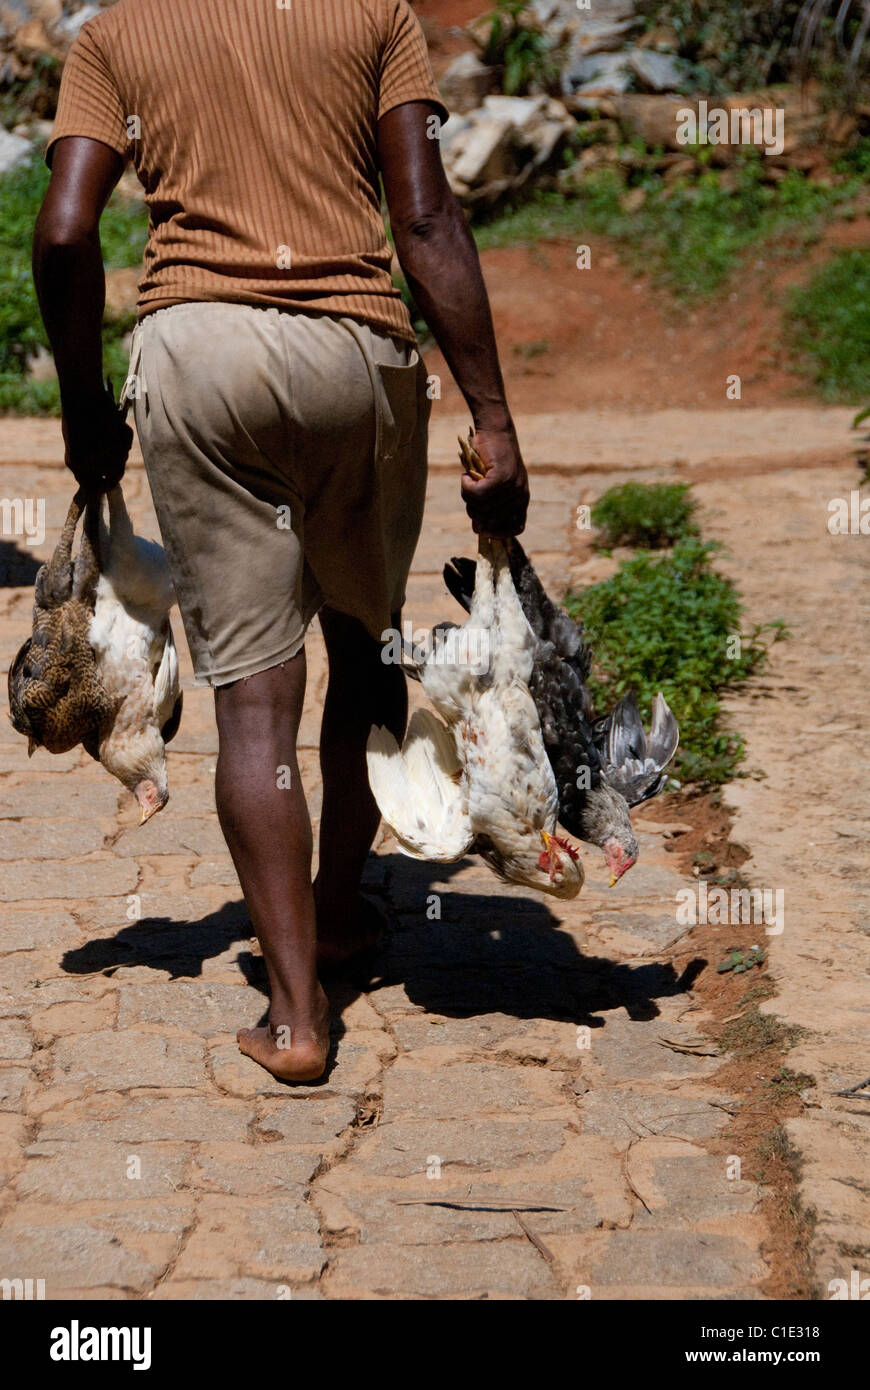 Madagascar, Island of Nosy Komba (next to Nosy Be) fishing village of Ampangoriana. Local villager with dead chickens. Stock Photo